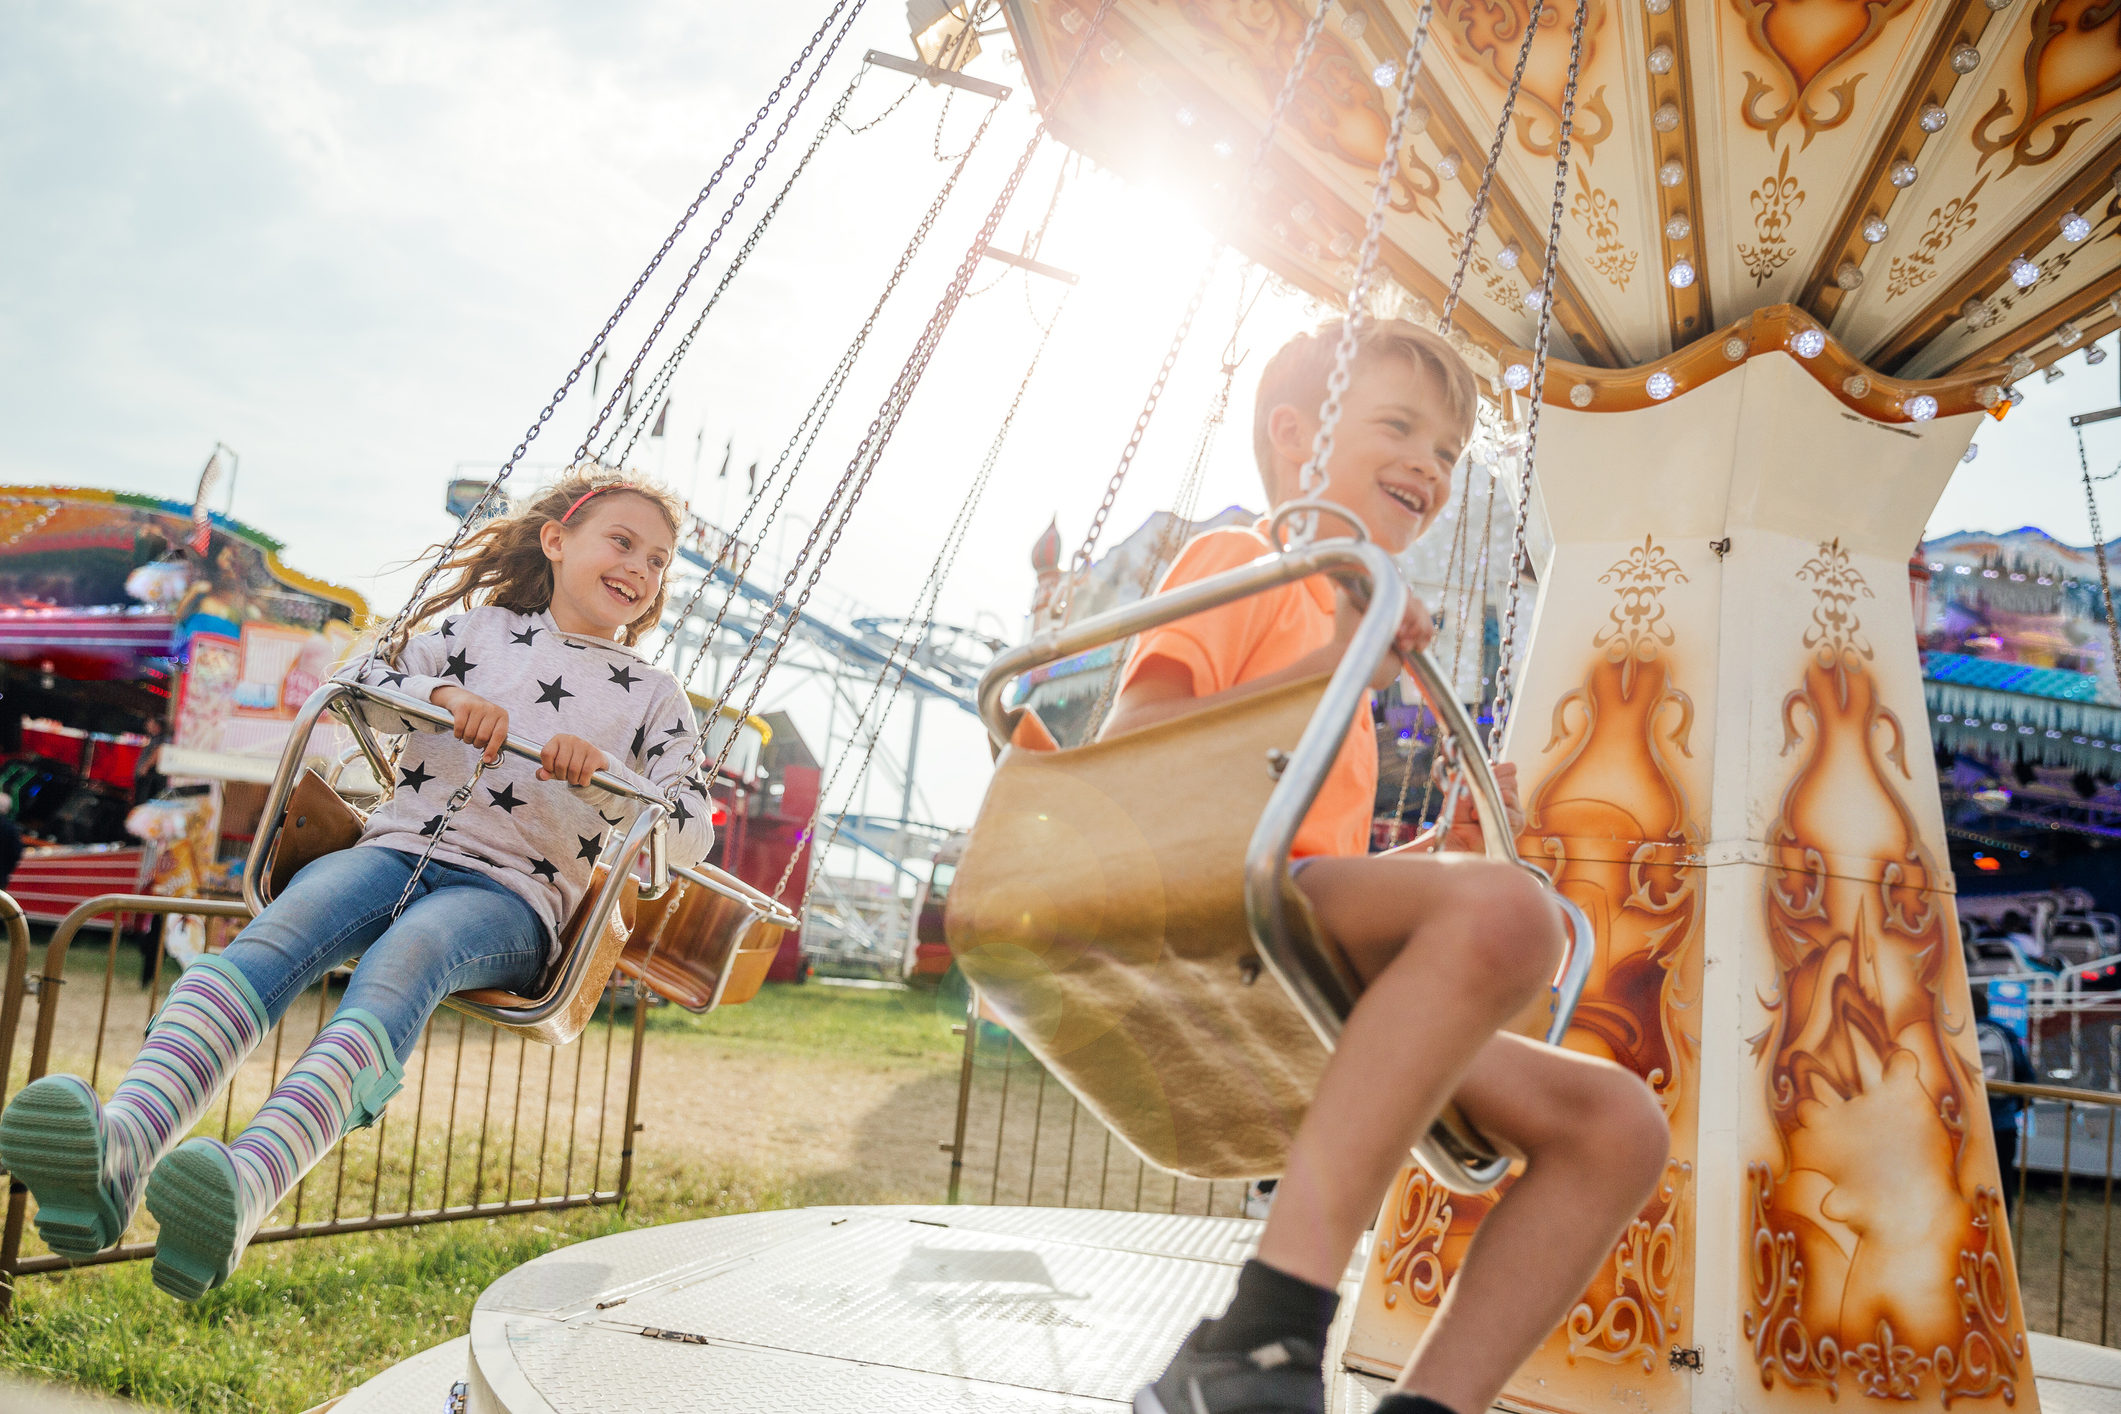 children ride a swinging carousel at an event.